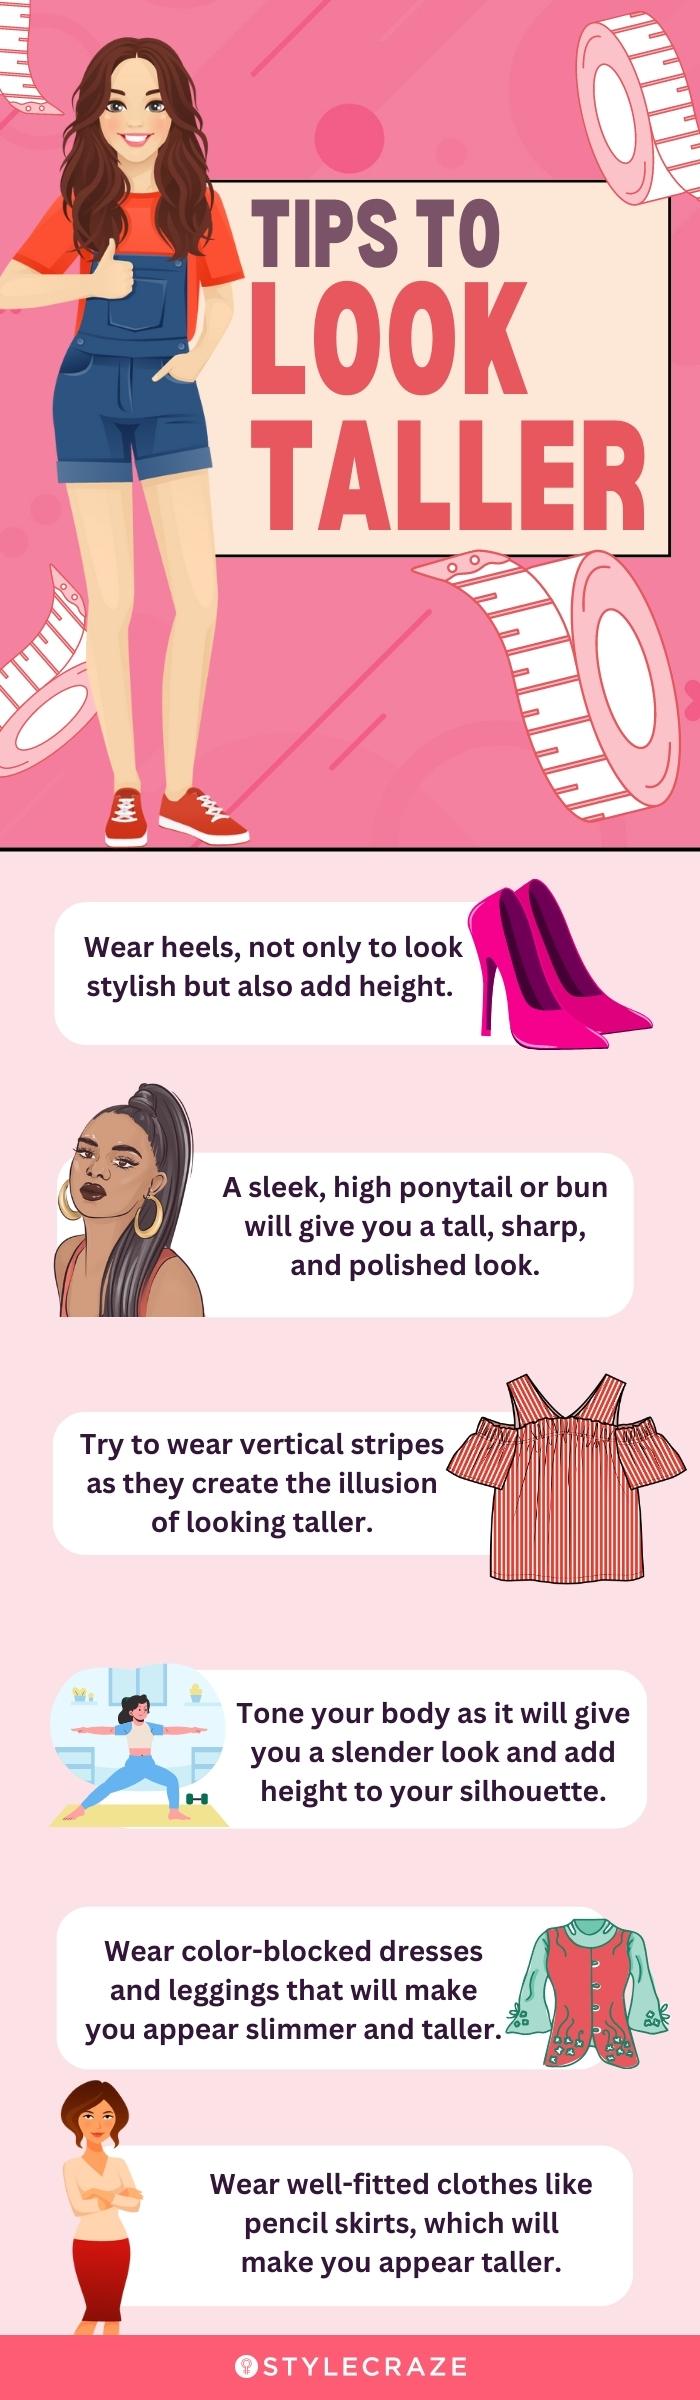 tips to look taller (infographic)